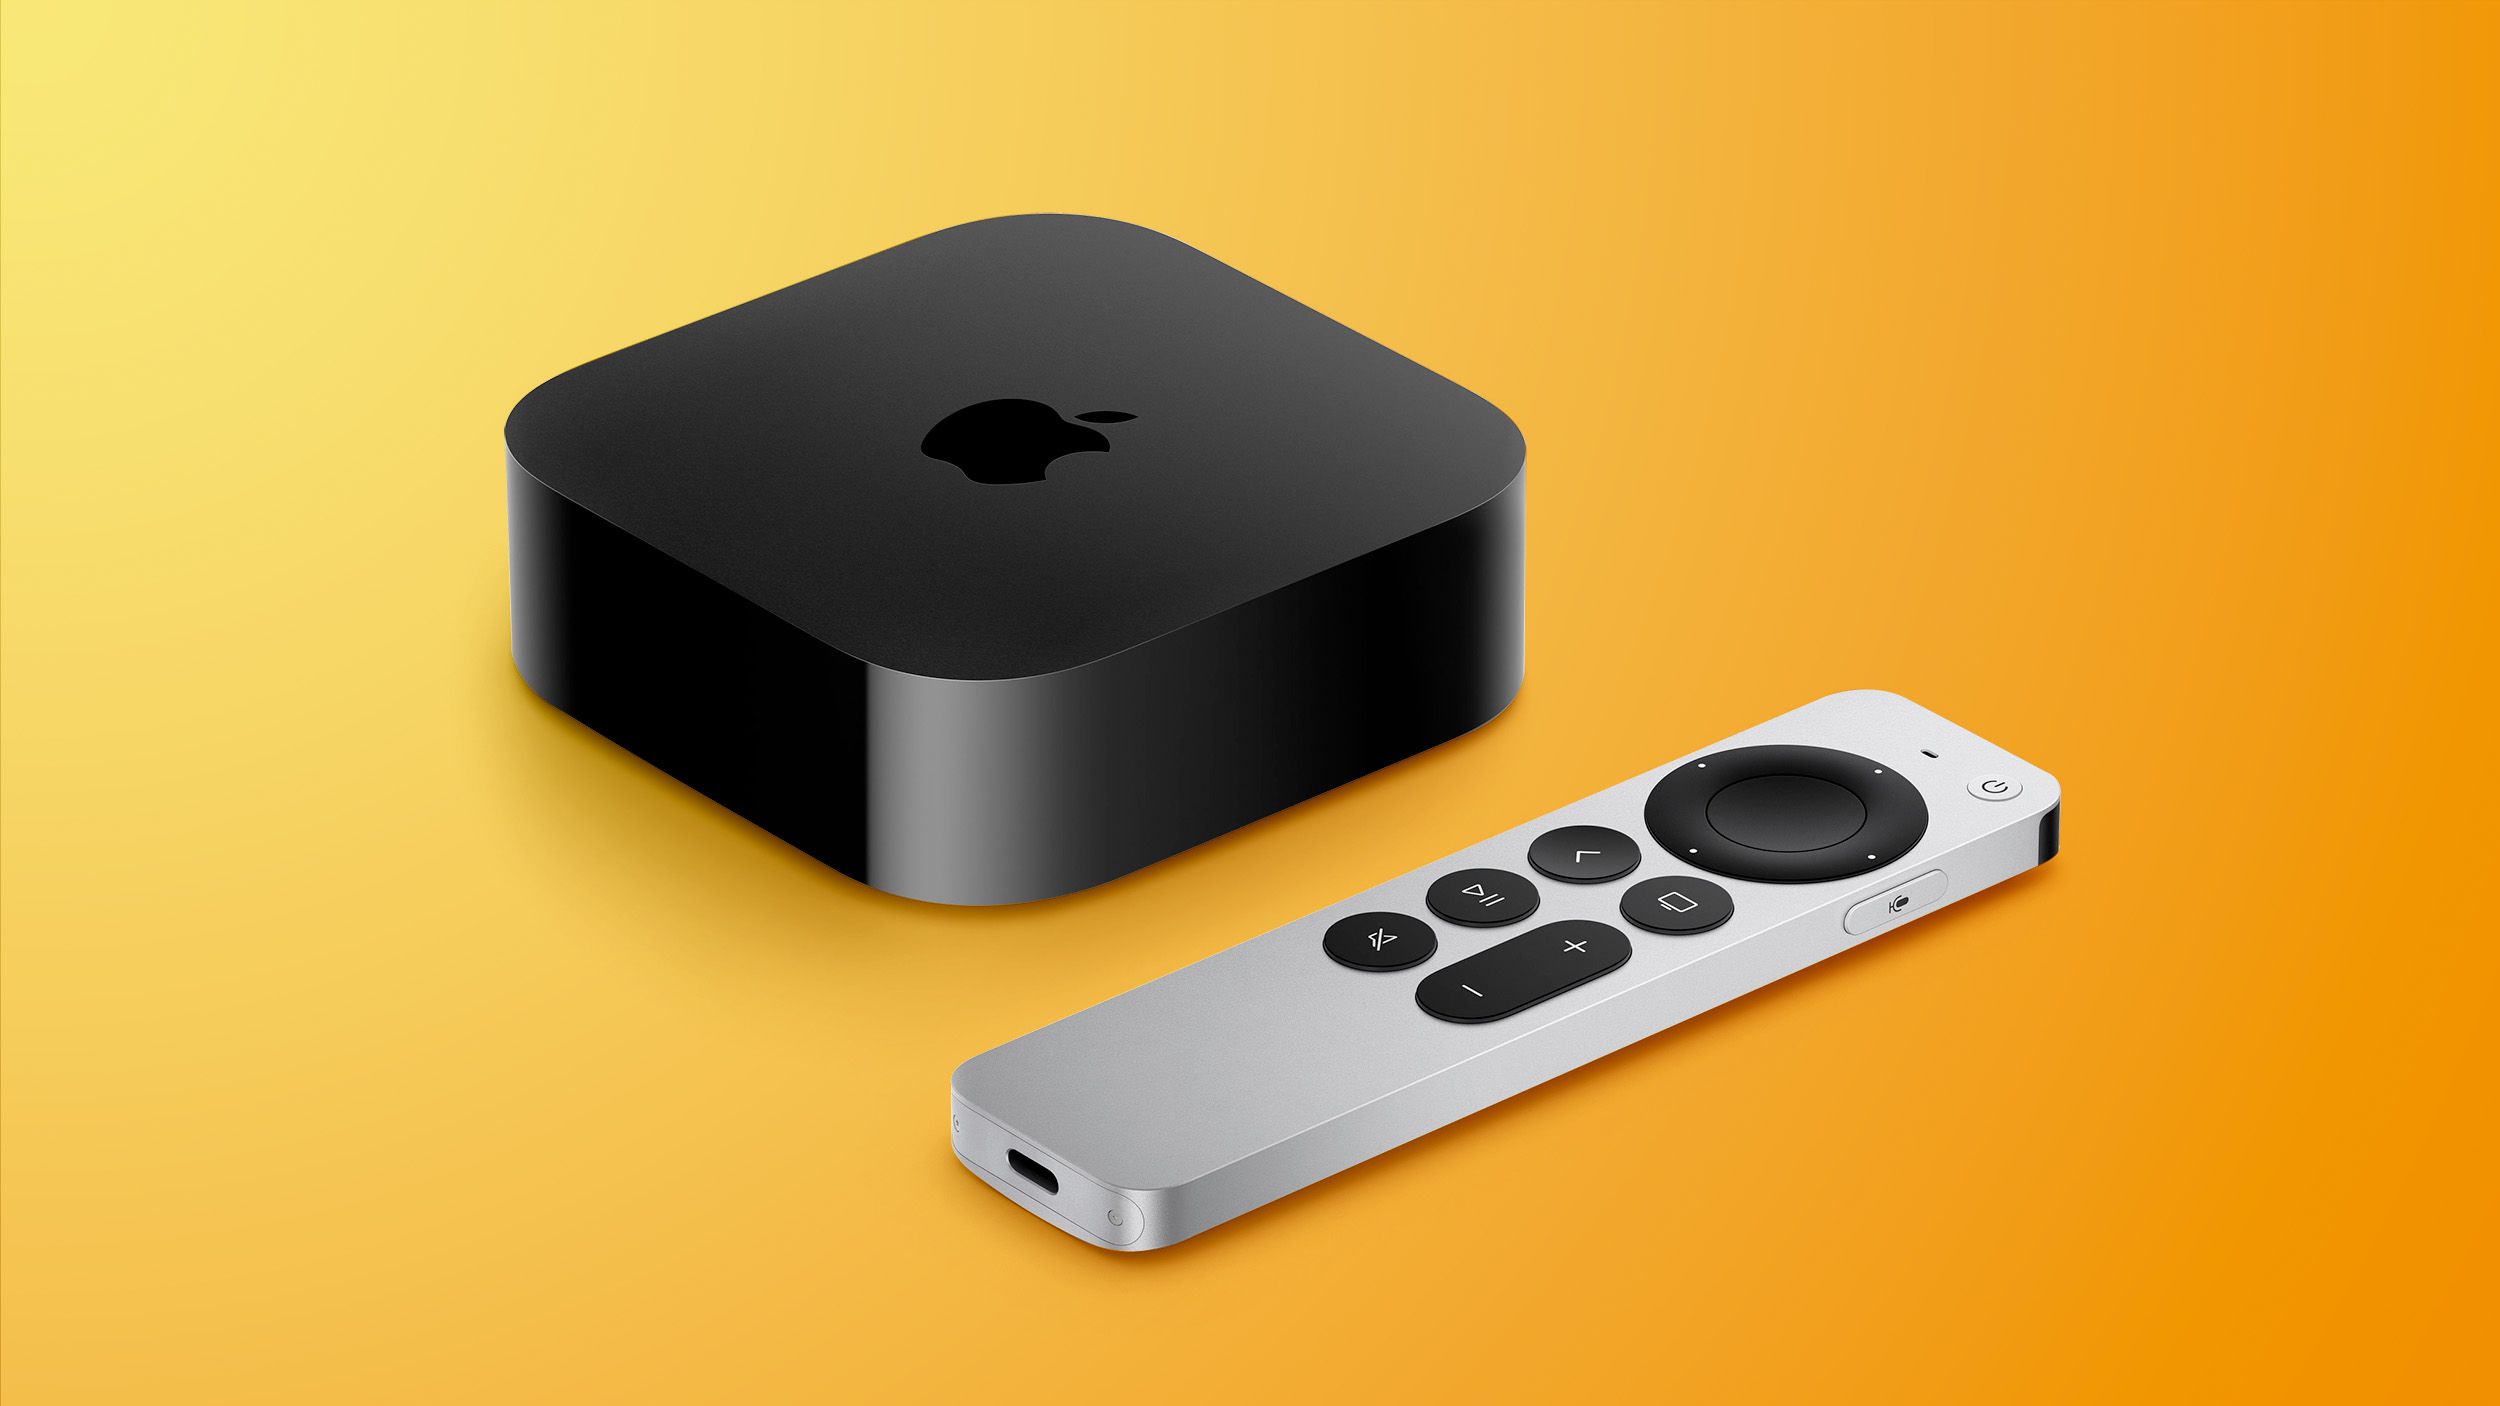 Apple TV 4K officially launched..but delays and shortages affect availability